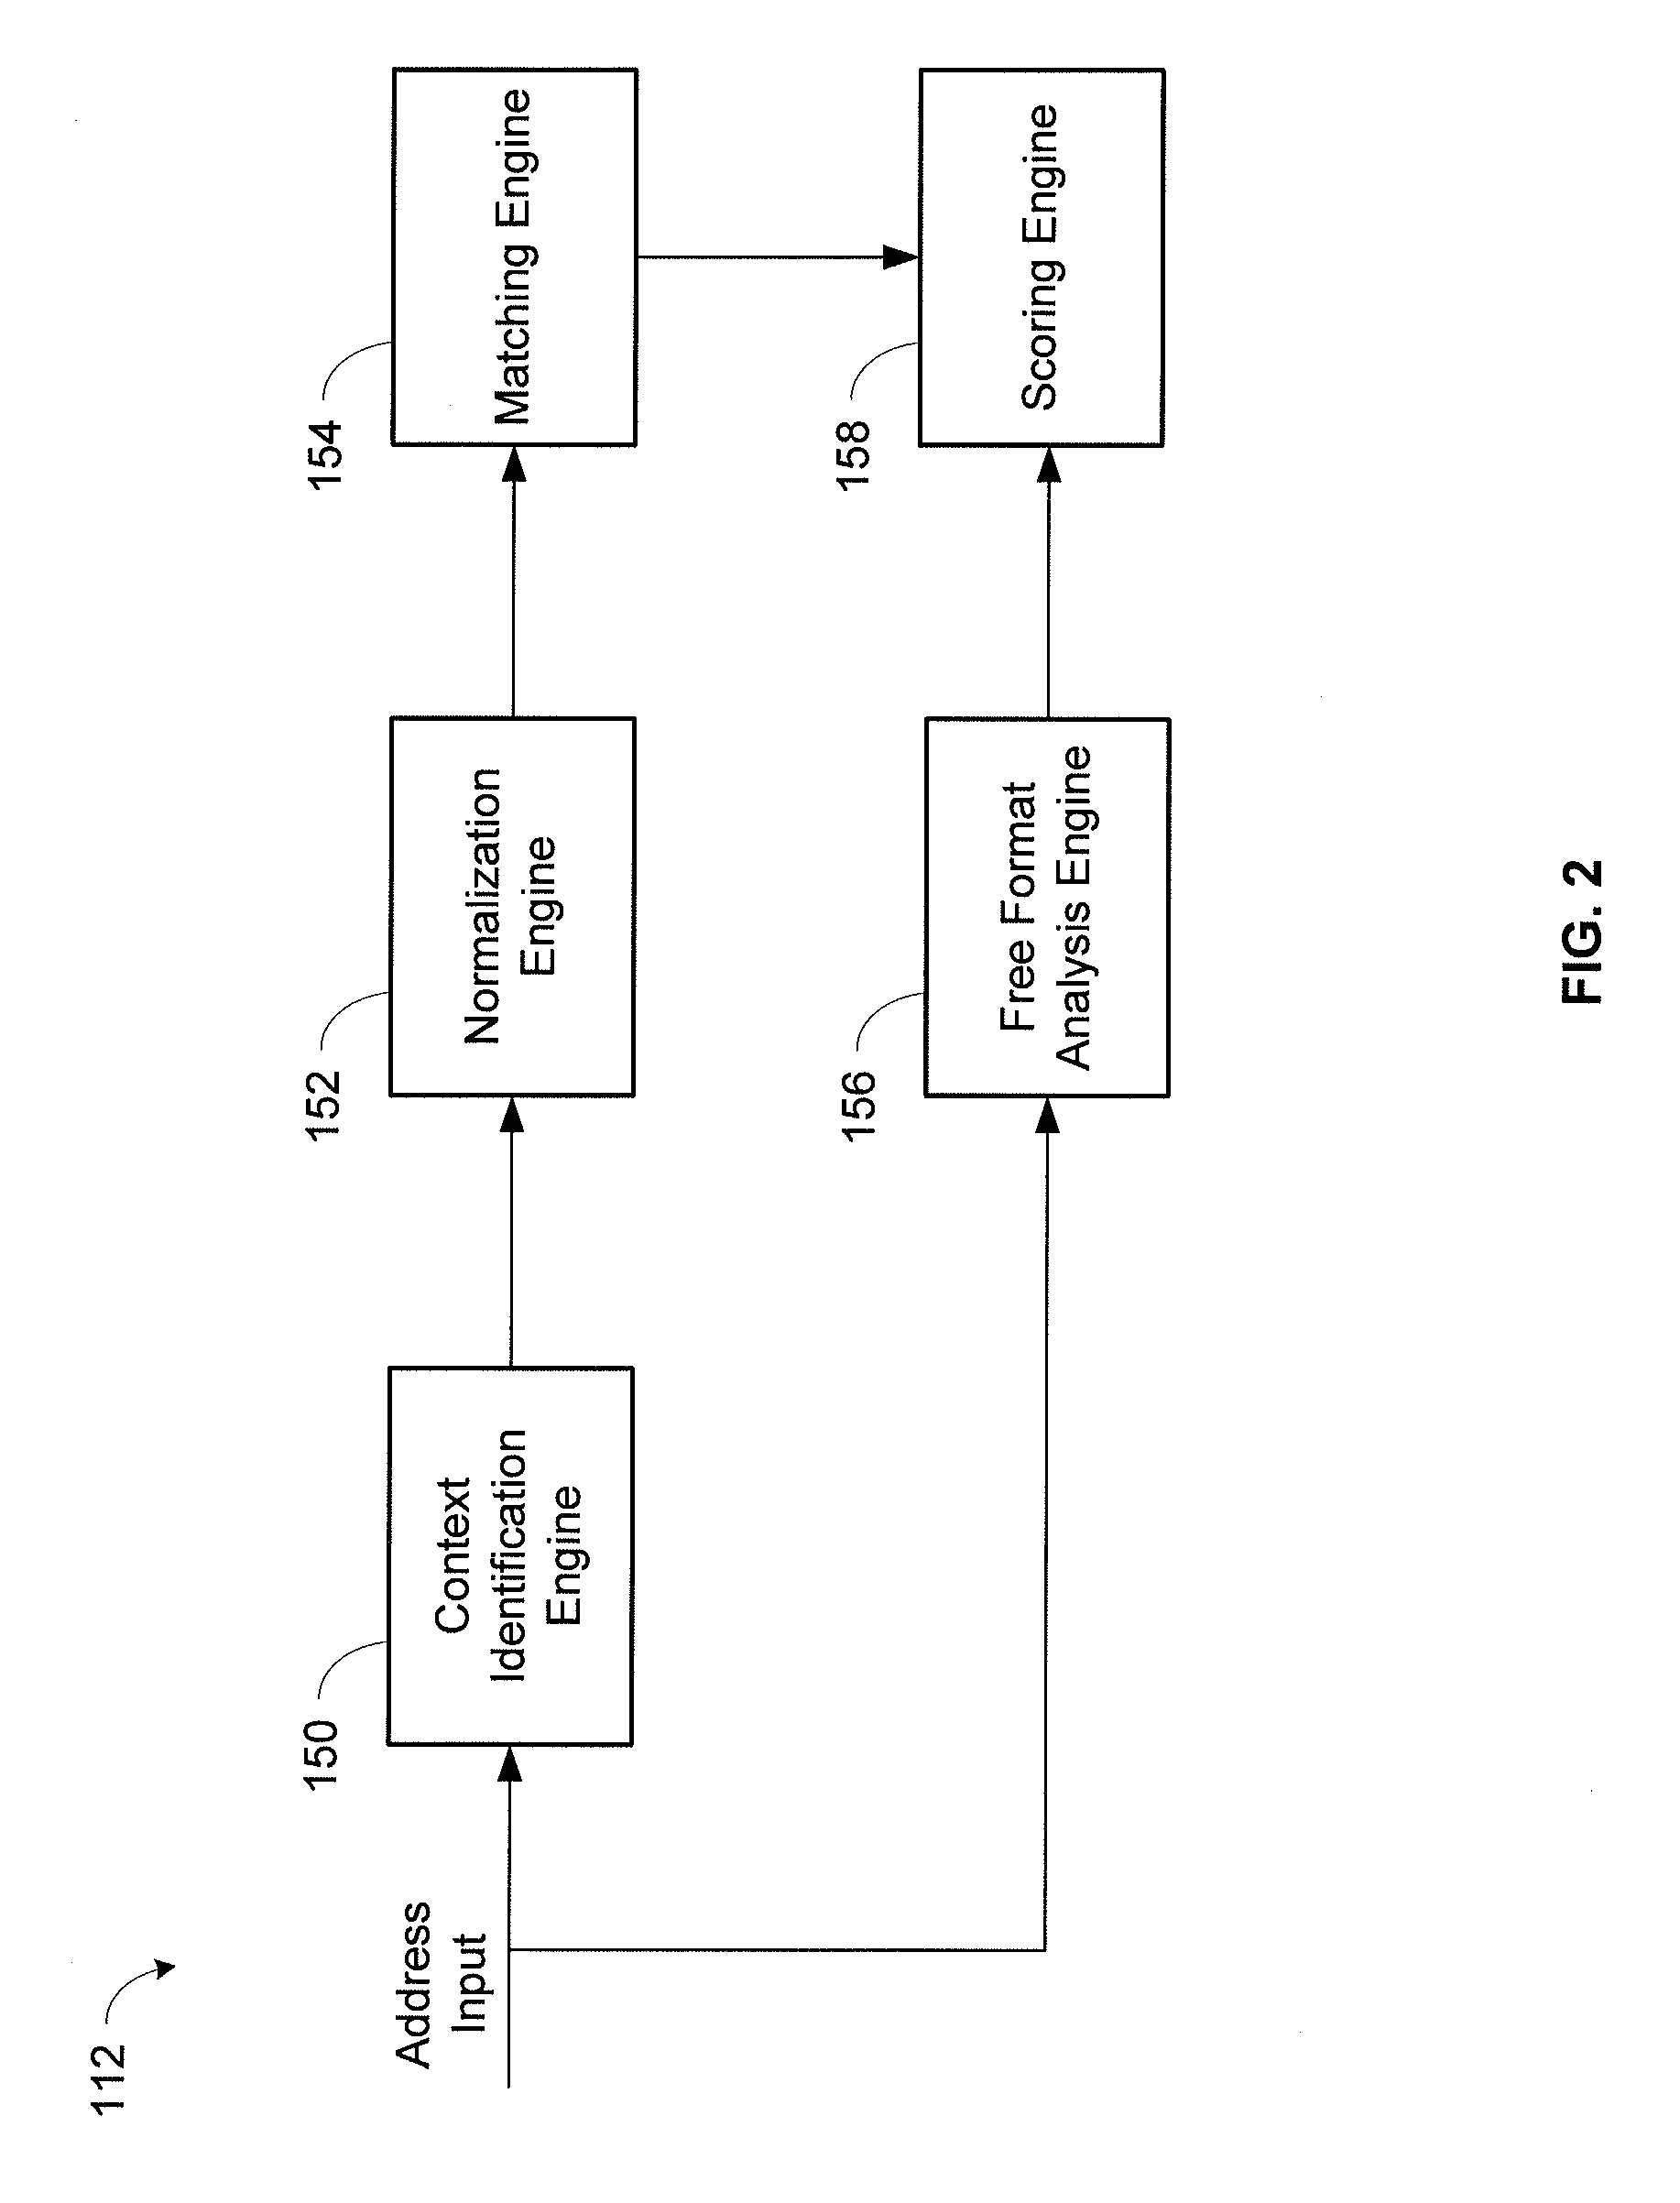 System and method for contextual and free format matching of addresses